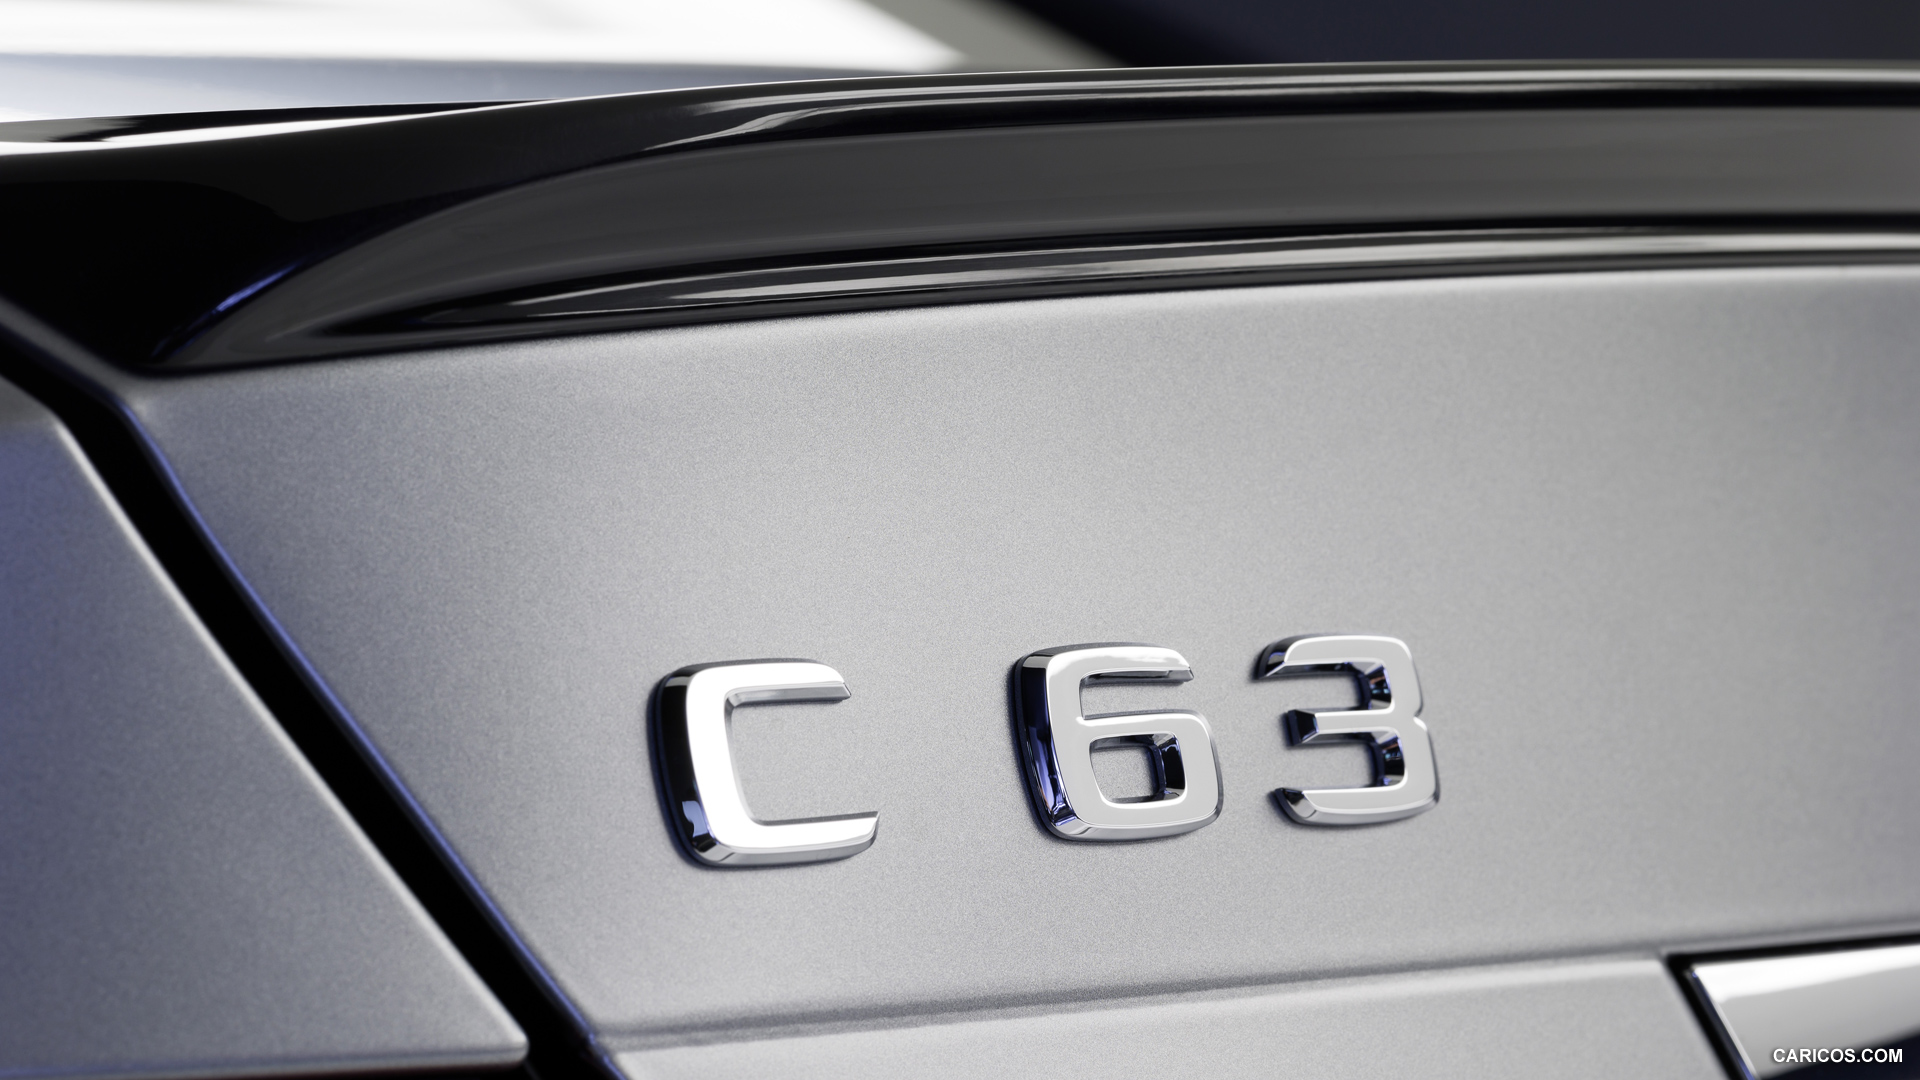 Mercedes-Benz C 63 AMG "Edition 507" (2013)  - Badge, #18 of 21